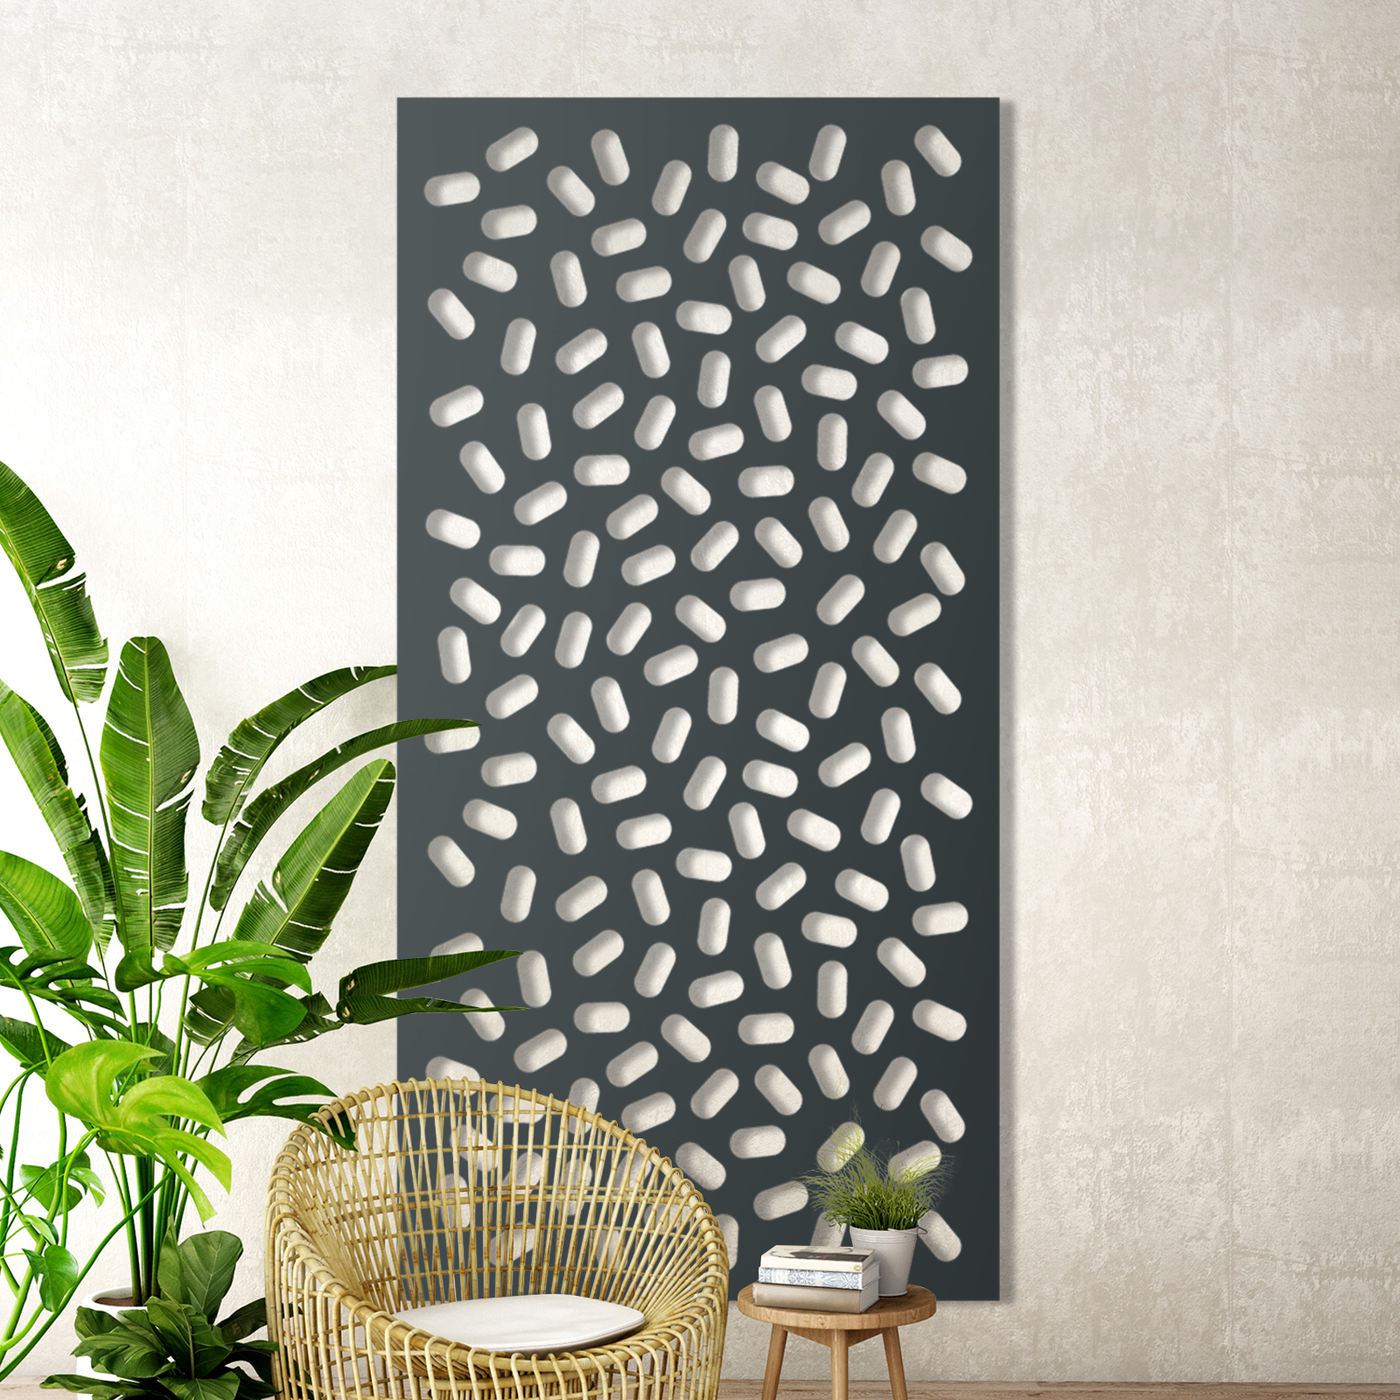 Ticky Tak Metal Screen: The Perfect Addition to Any Outdoor Garden